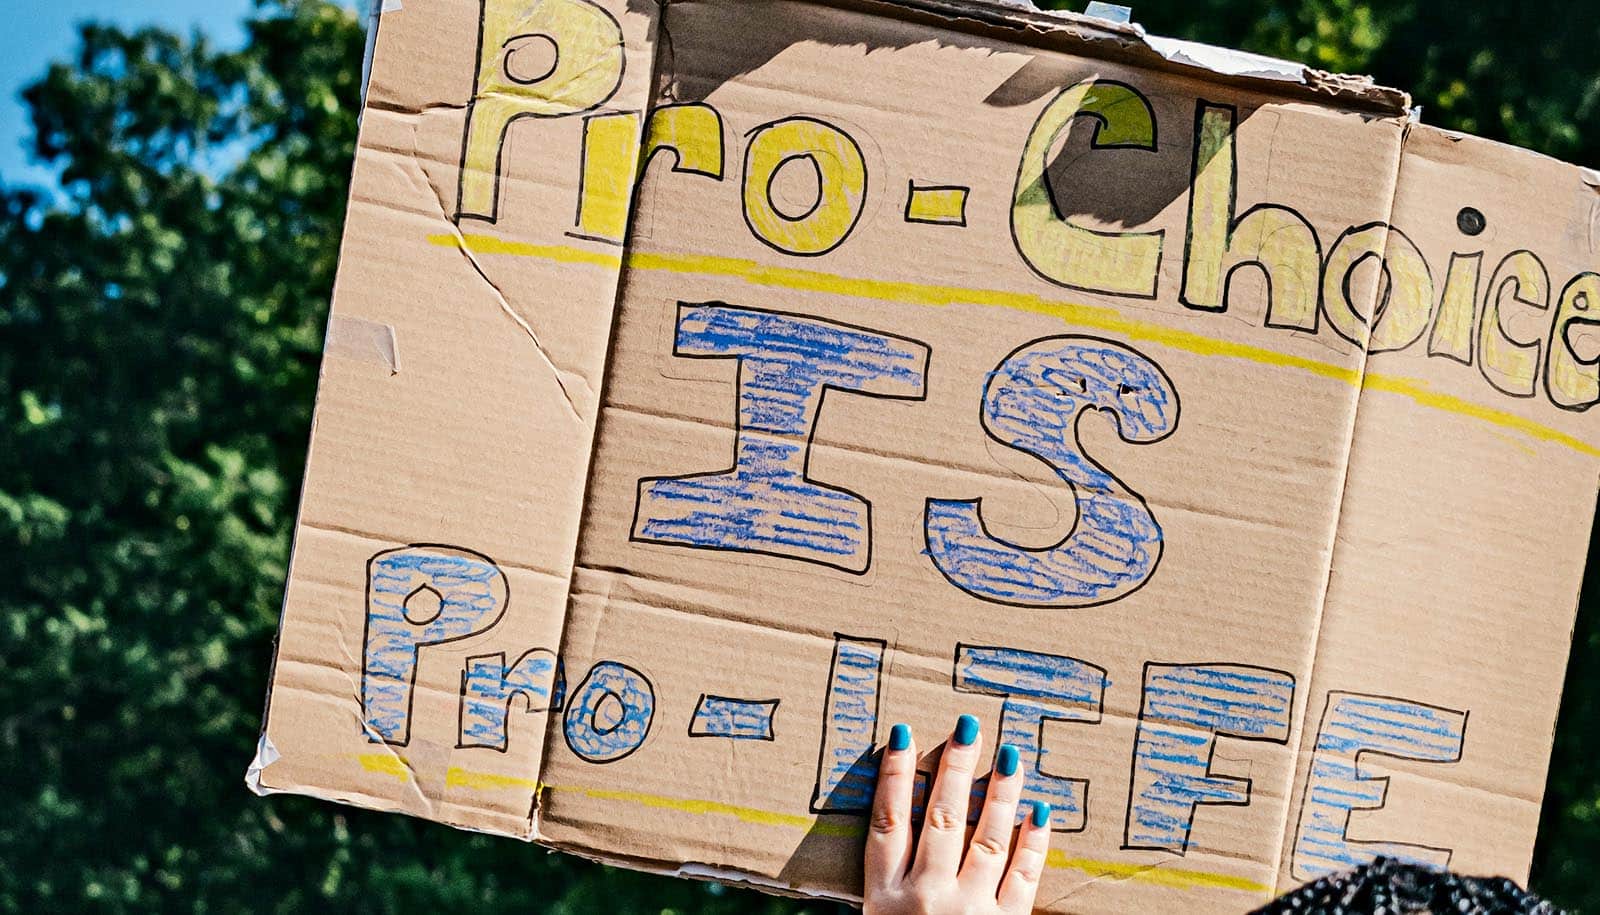 cardboard sign says "pro-choice is pro-life"